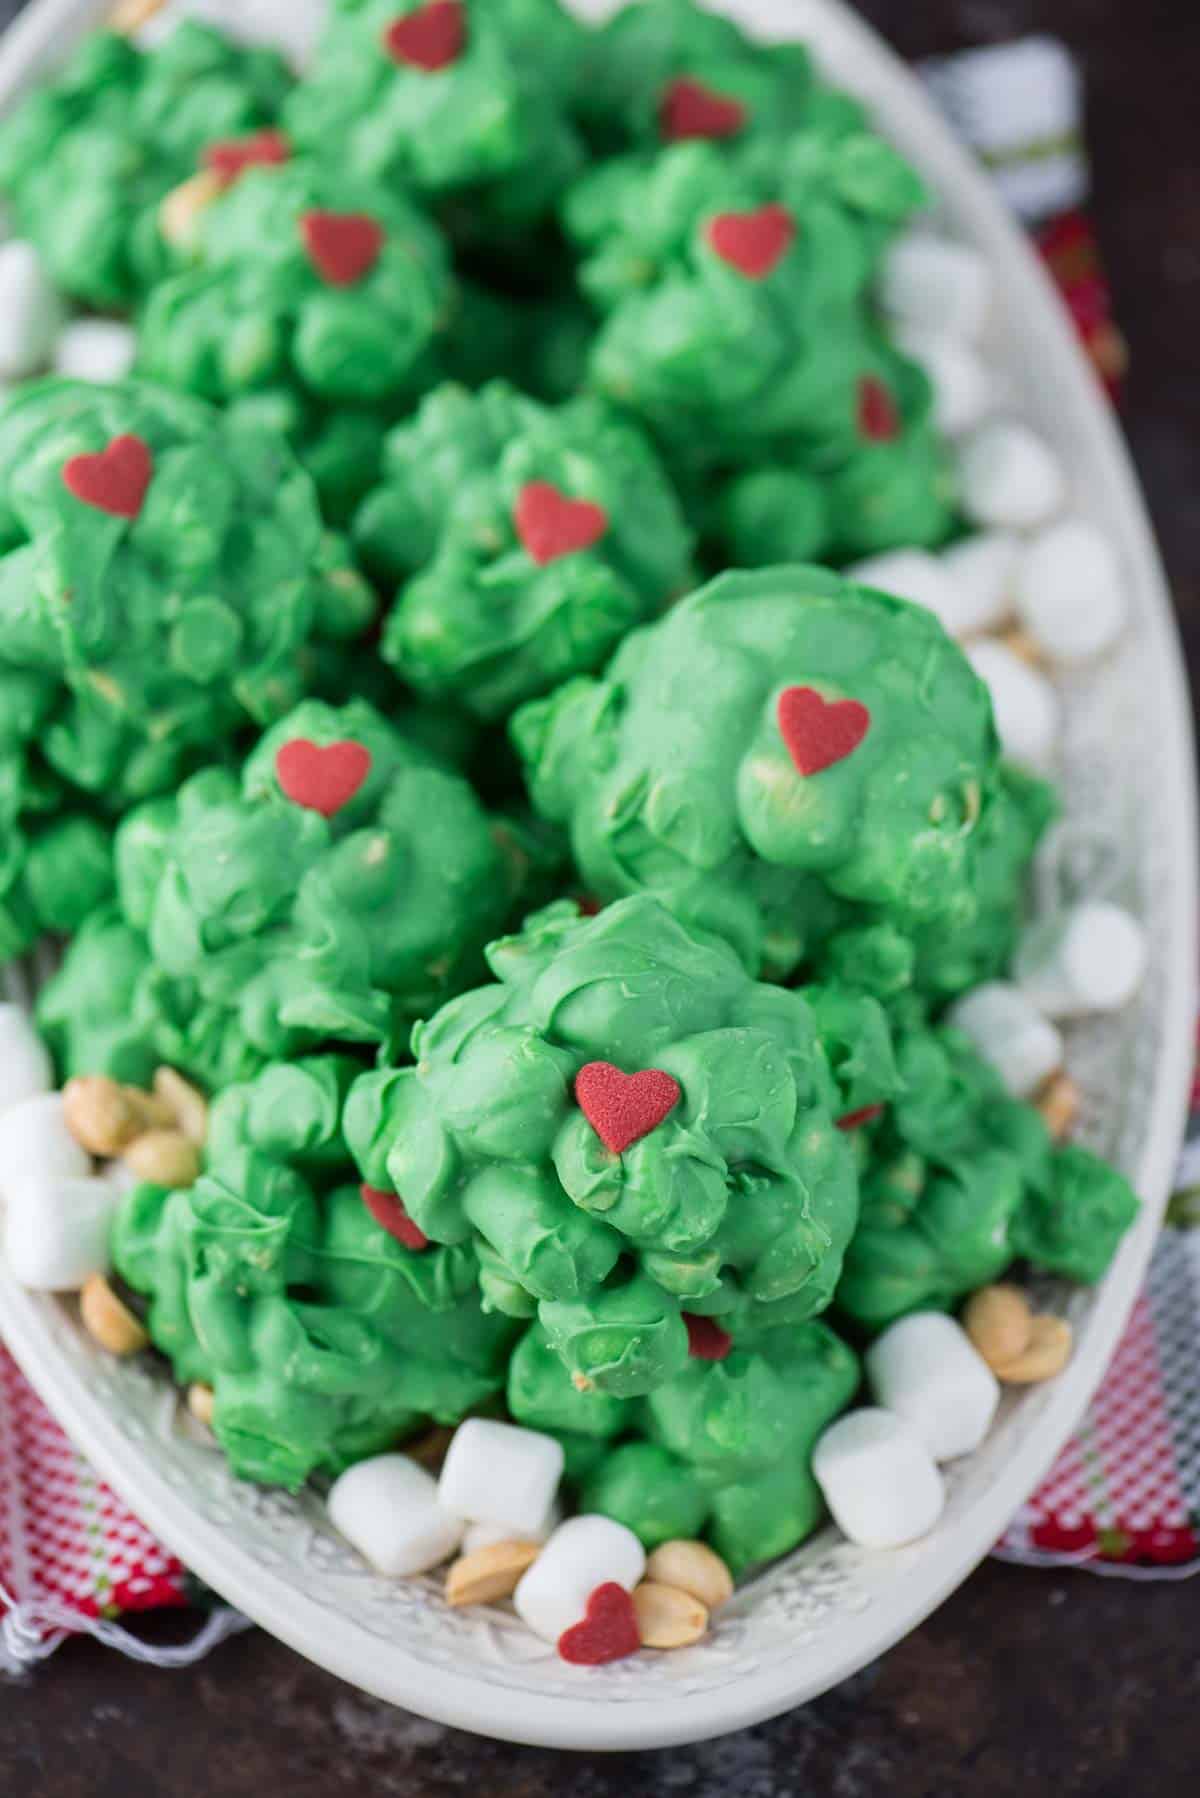 https://thefirstyearblog.com/wp-content/uploads/2018/11/Grinch-Peanut-Marshmallow-Clusters-5.jpg